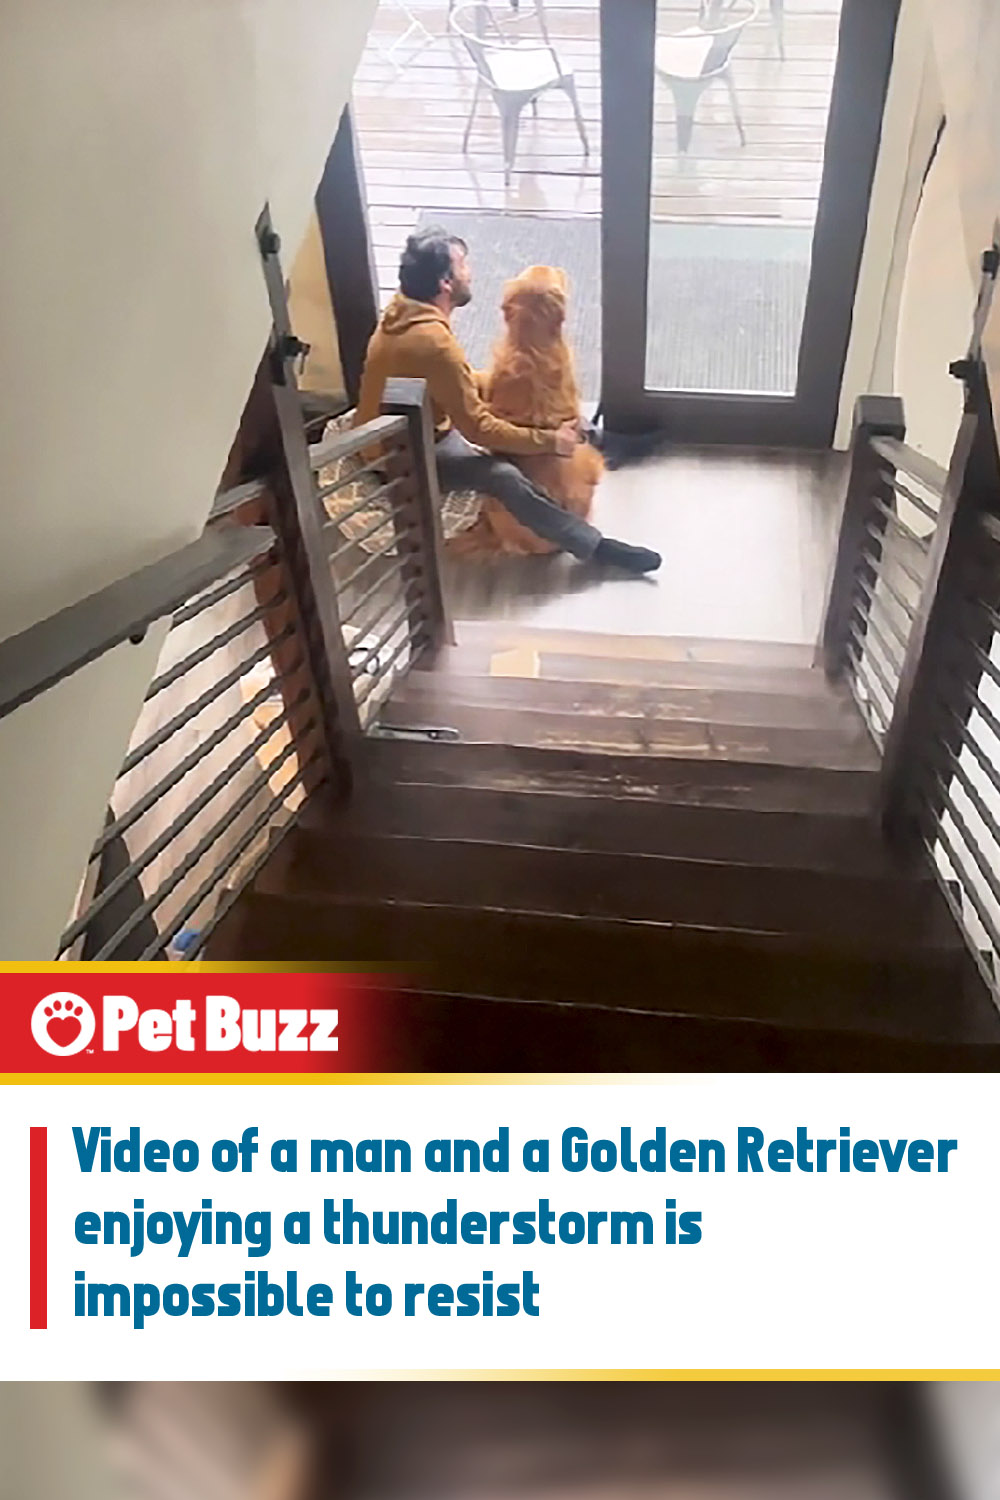 Video of a man and a Golden Retriever enjoying a thunderstorm is impossible to resist